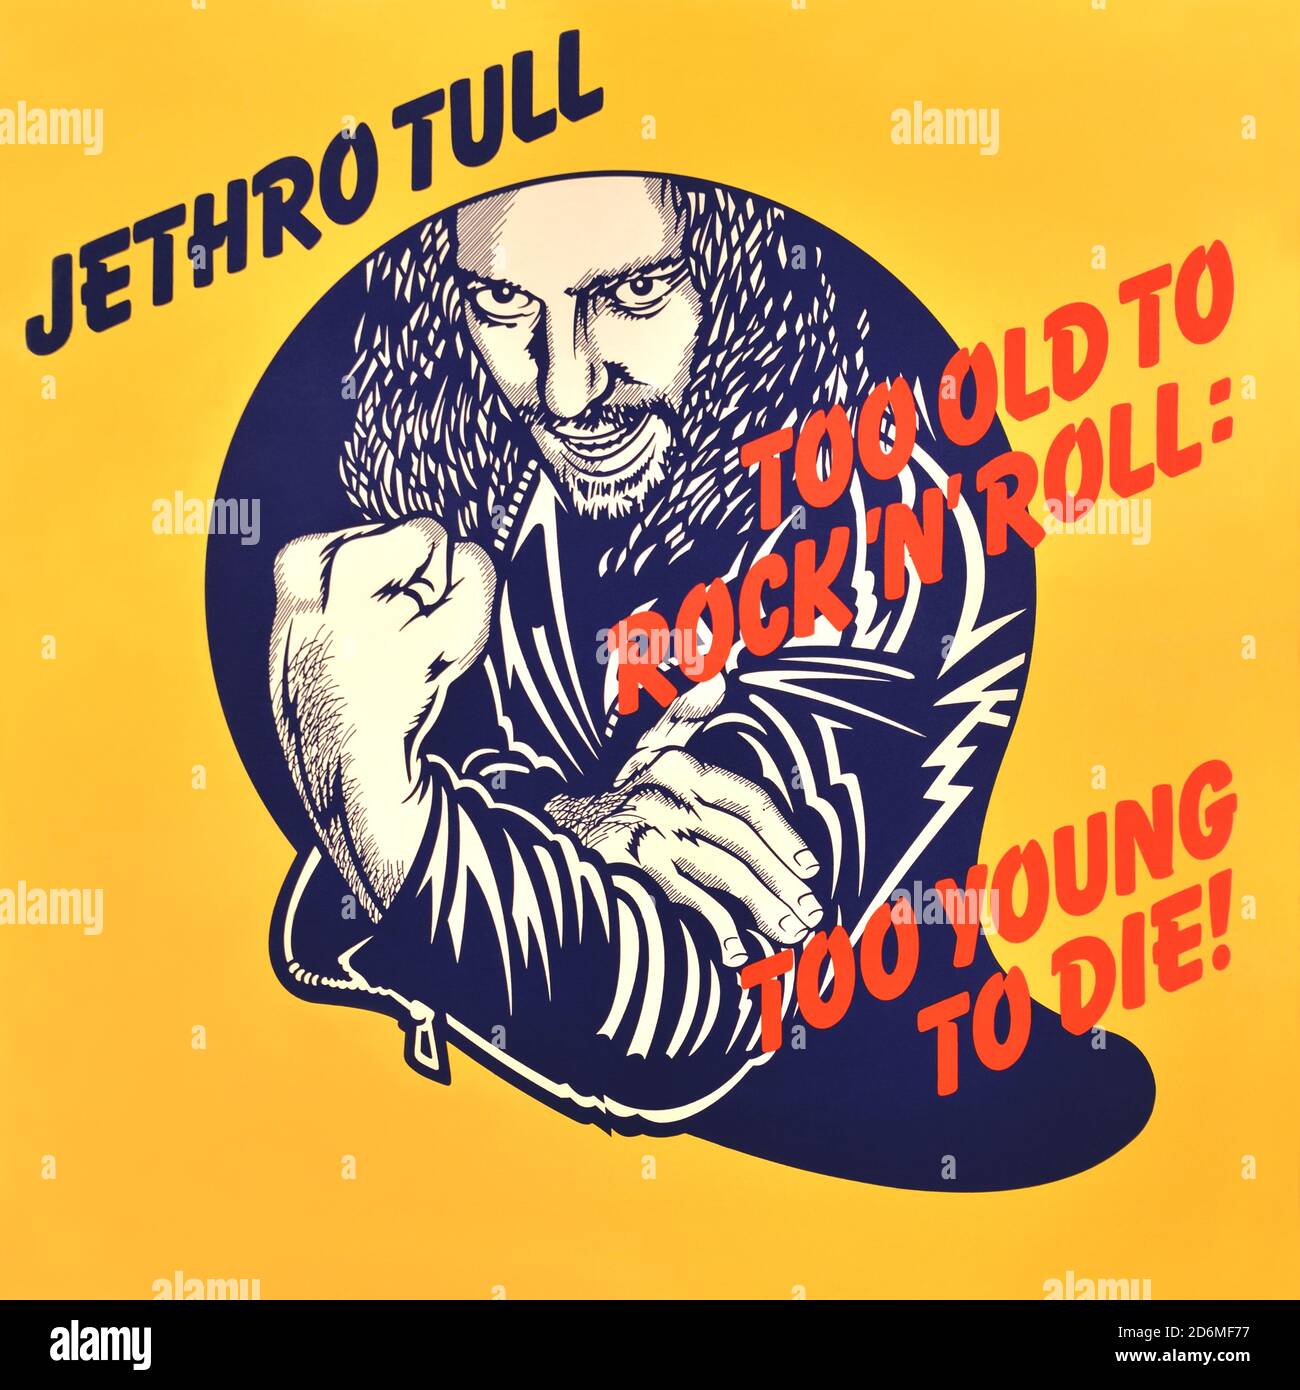 Jethro Tull - original vinyl album cover - Too Old To Rock N' Roll: Too Young To Die - 1976 Stock Photo